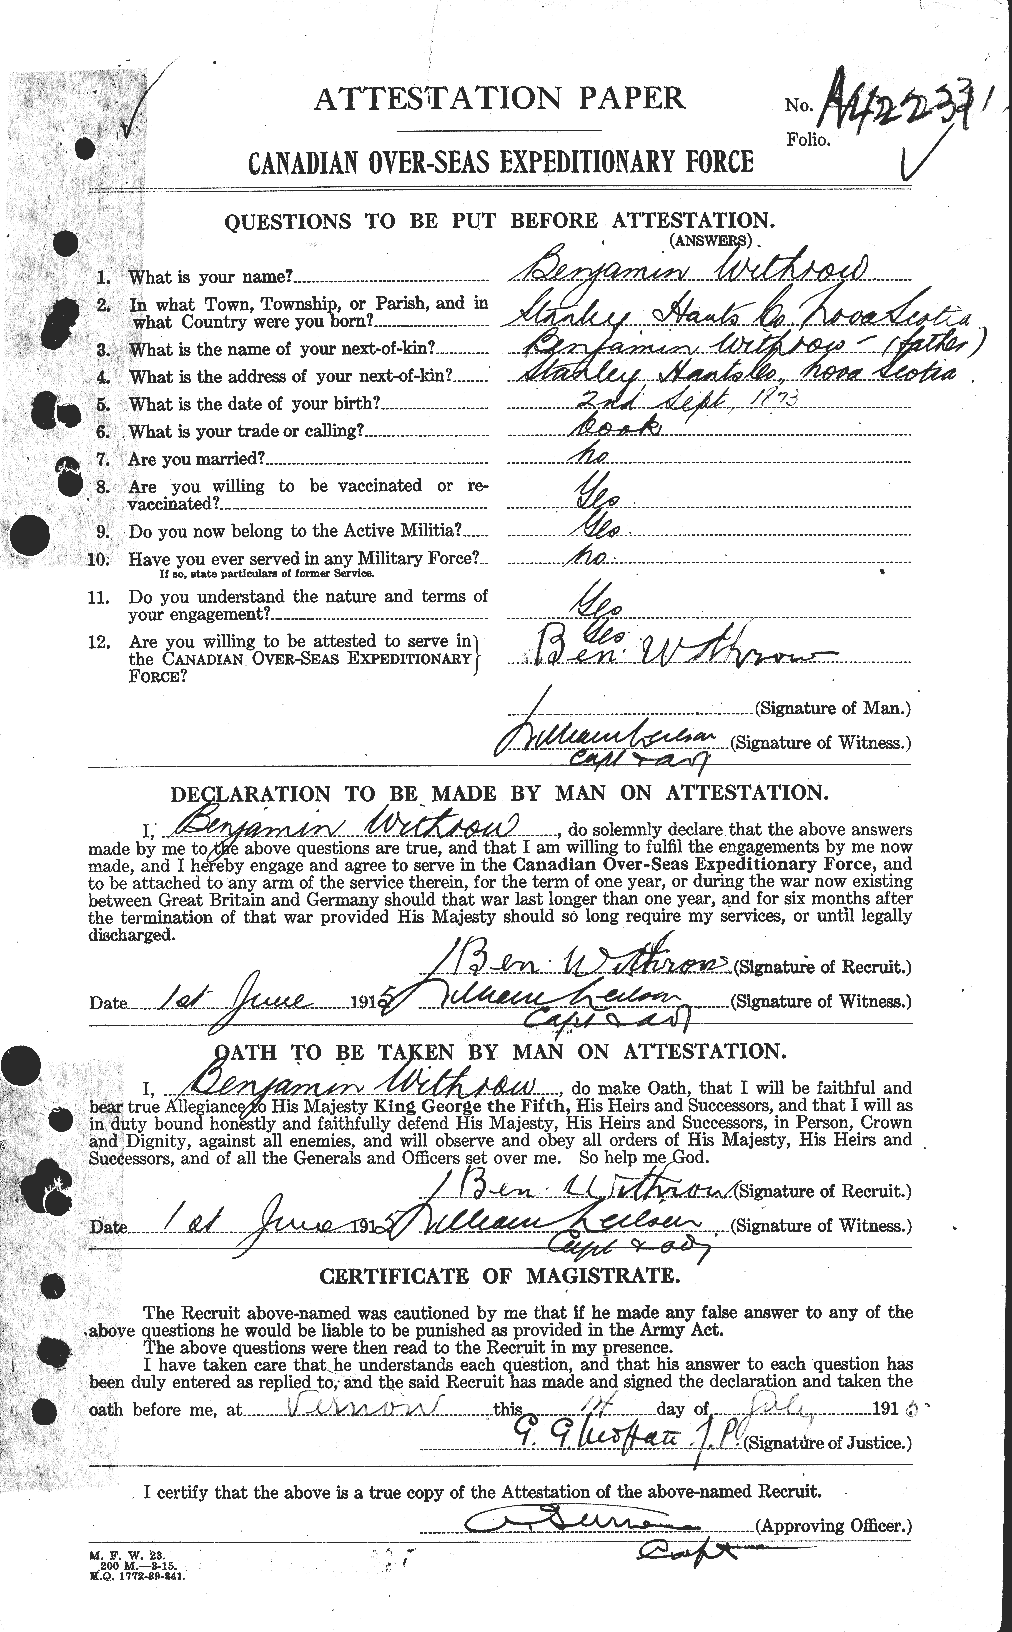 Personnel Records of the First World War - CEF 682084a